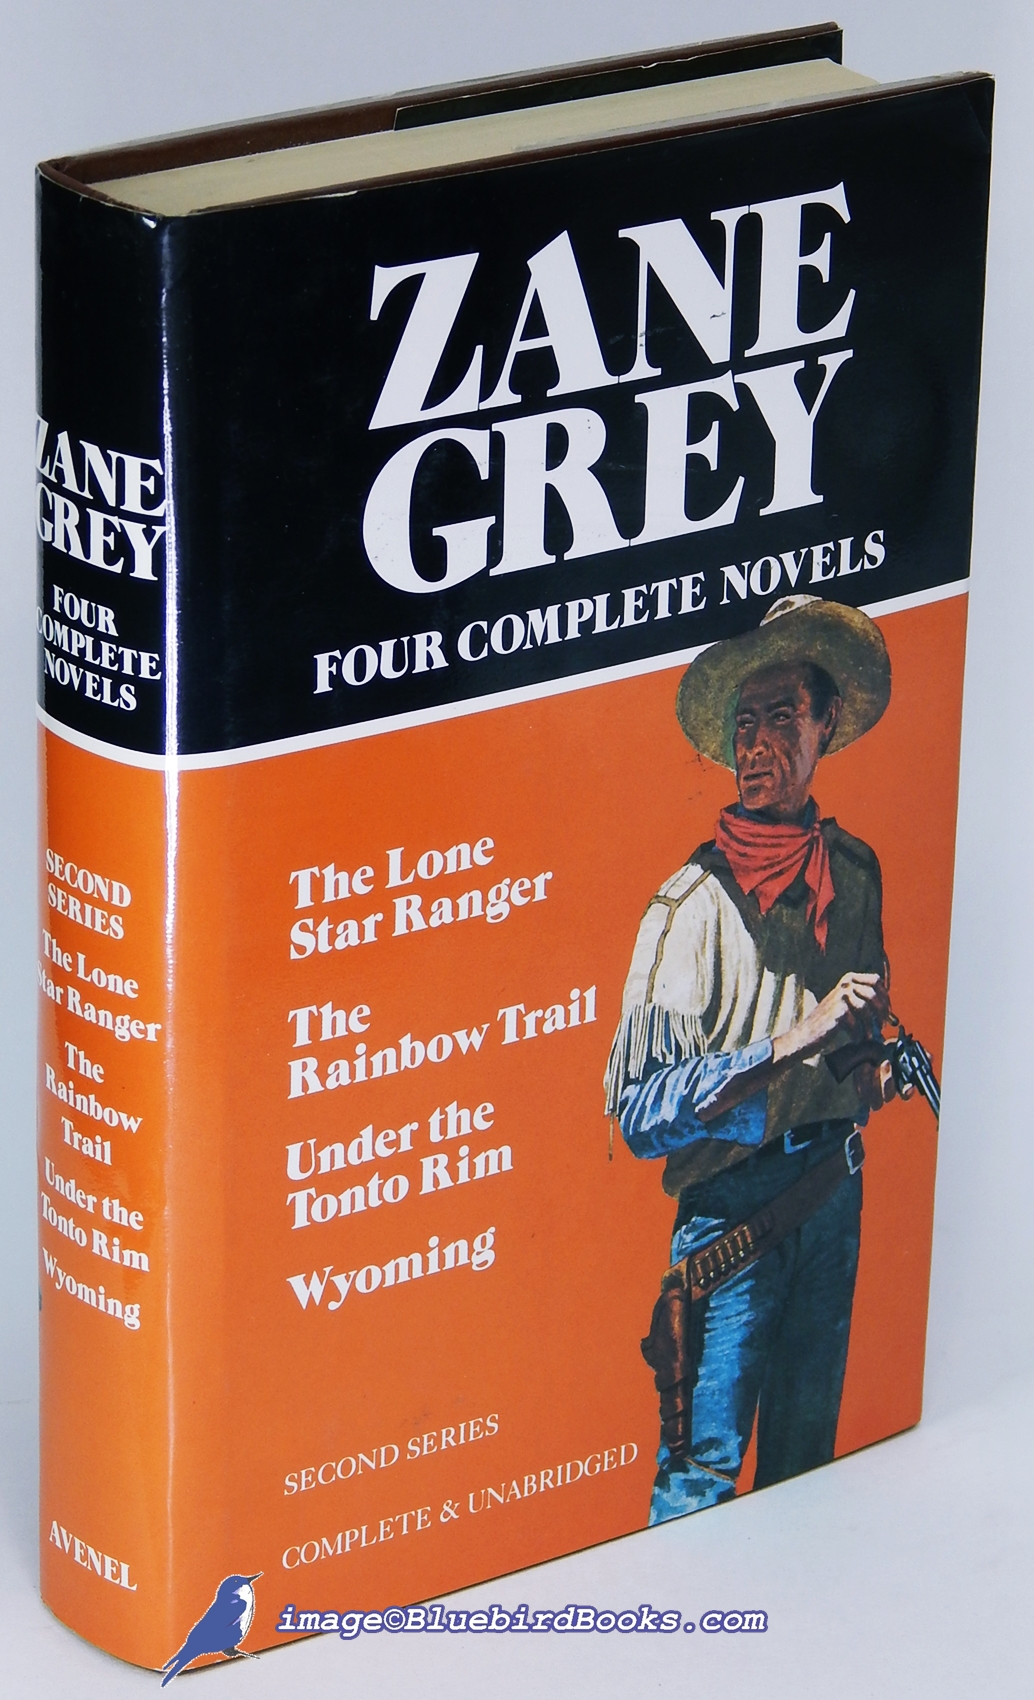 GREY, ZANE - Zane Grey: Four Complete Novels, Second Series the Lone Star Ranger, the Rainbow Trail, Under the Tonto Rim, Wyoming